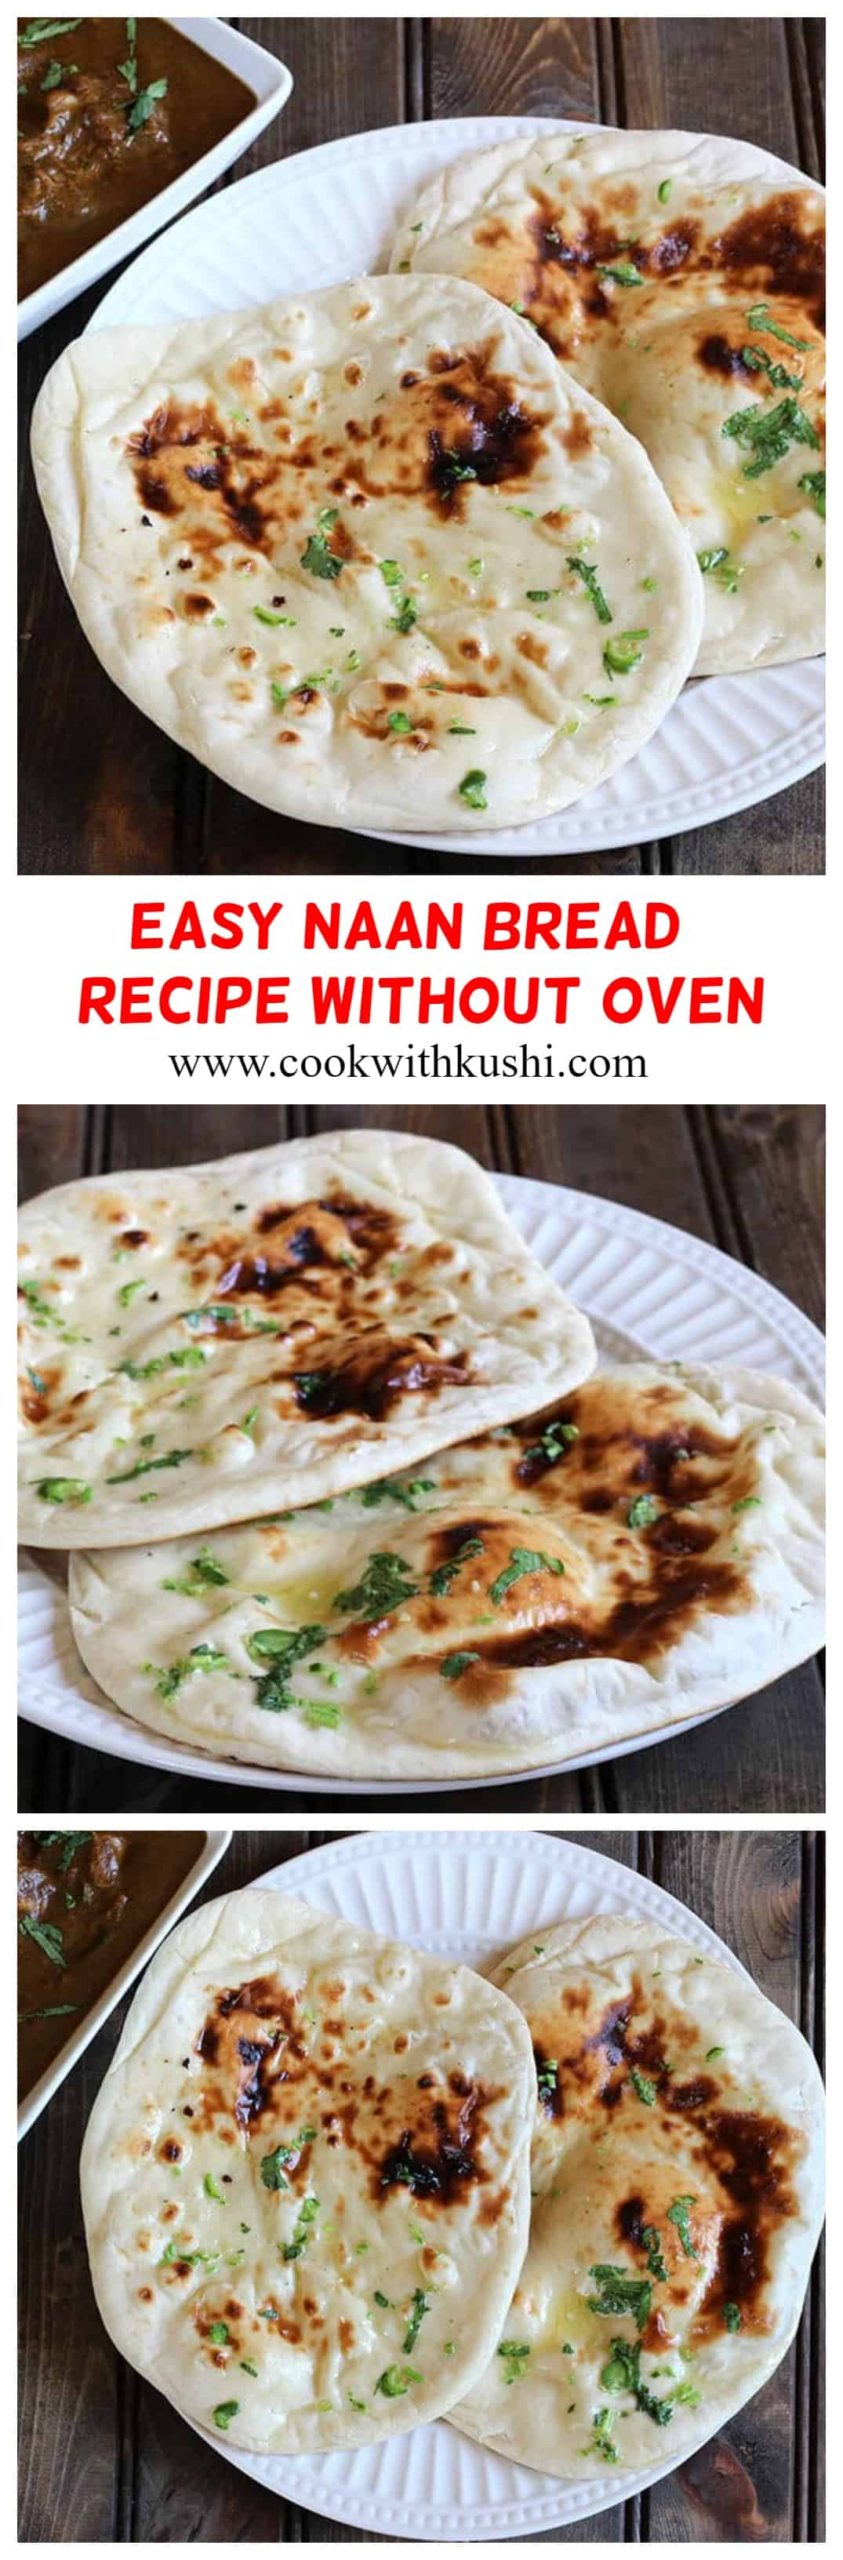 Tava Naan or Tawa Naan is a soft and chewy, delicious and super easy to make homemade Indian flatbread recipe prepared on a cast iron skillet. This naan recipe can be made without oven. #naan #roti #easynaanbread #homemadenaan #tawanaan #tavanaan #Naanwithoutoven #naanwithoutyeast #plainnaan #garlicnaan #butternaan